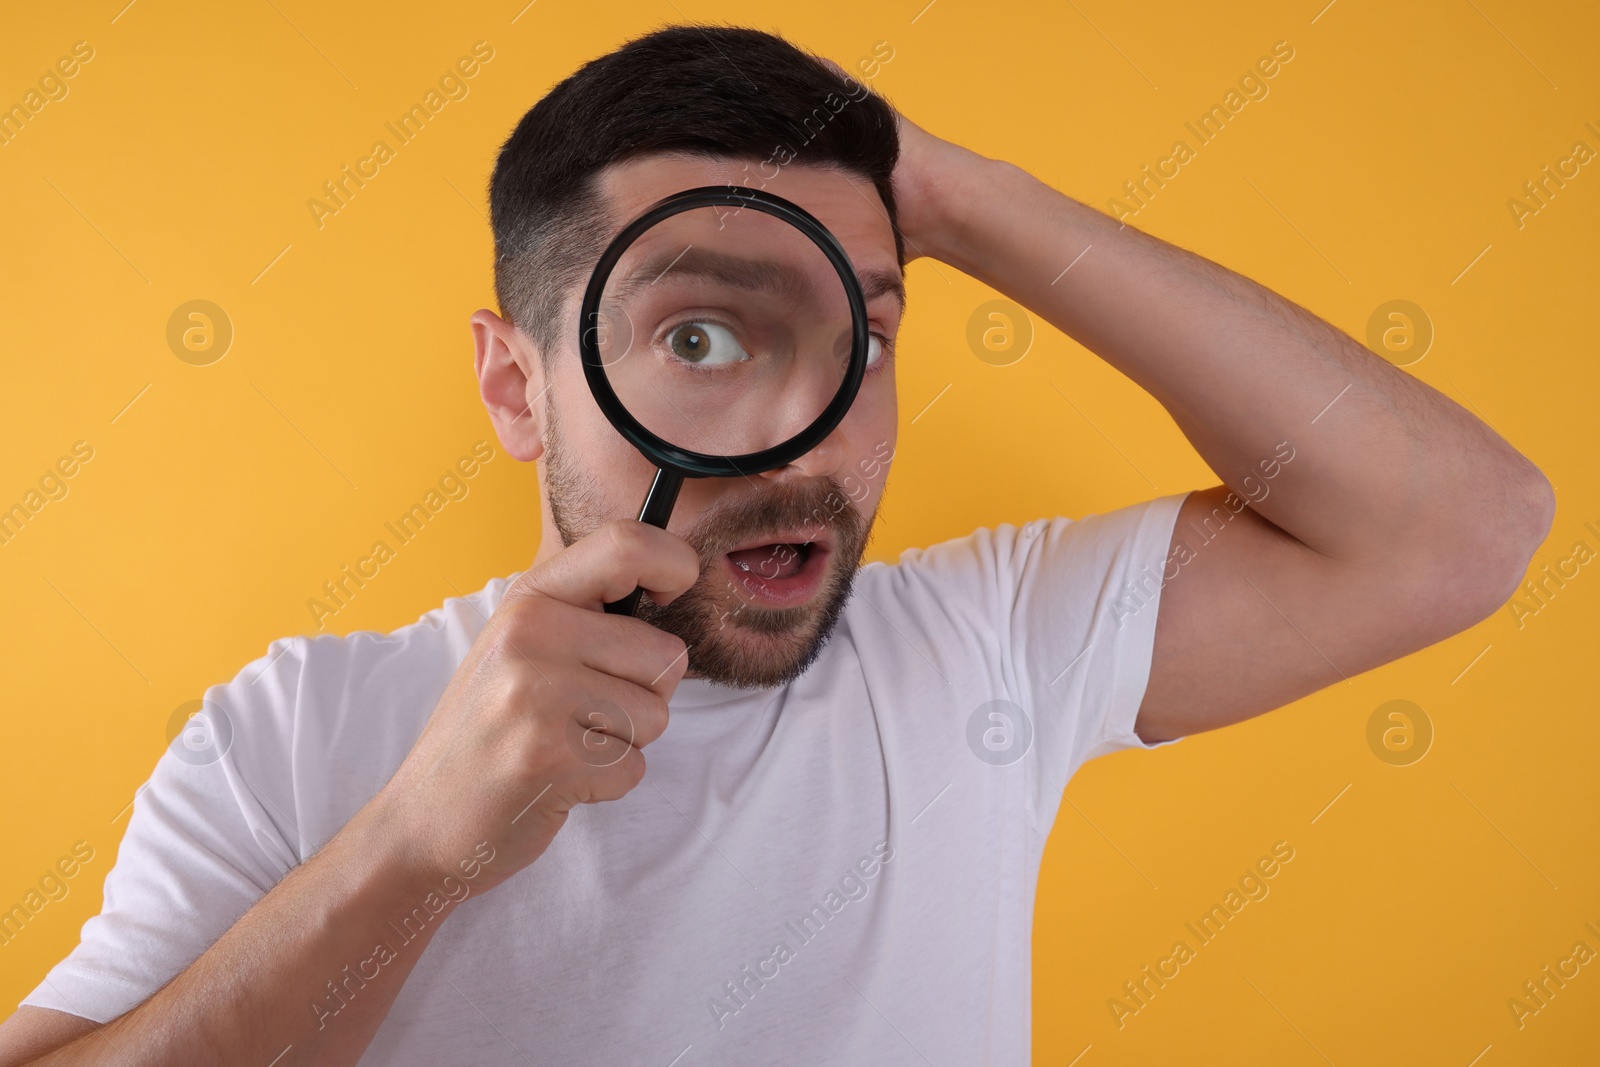 Photo of Surprised man looking through magnifier glass on yellow background